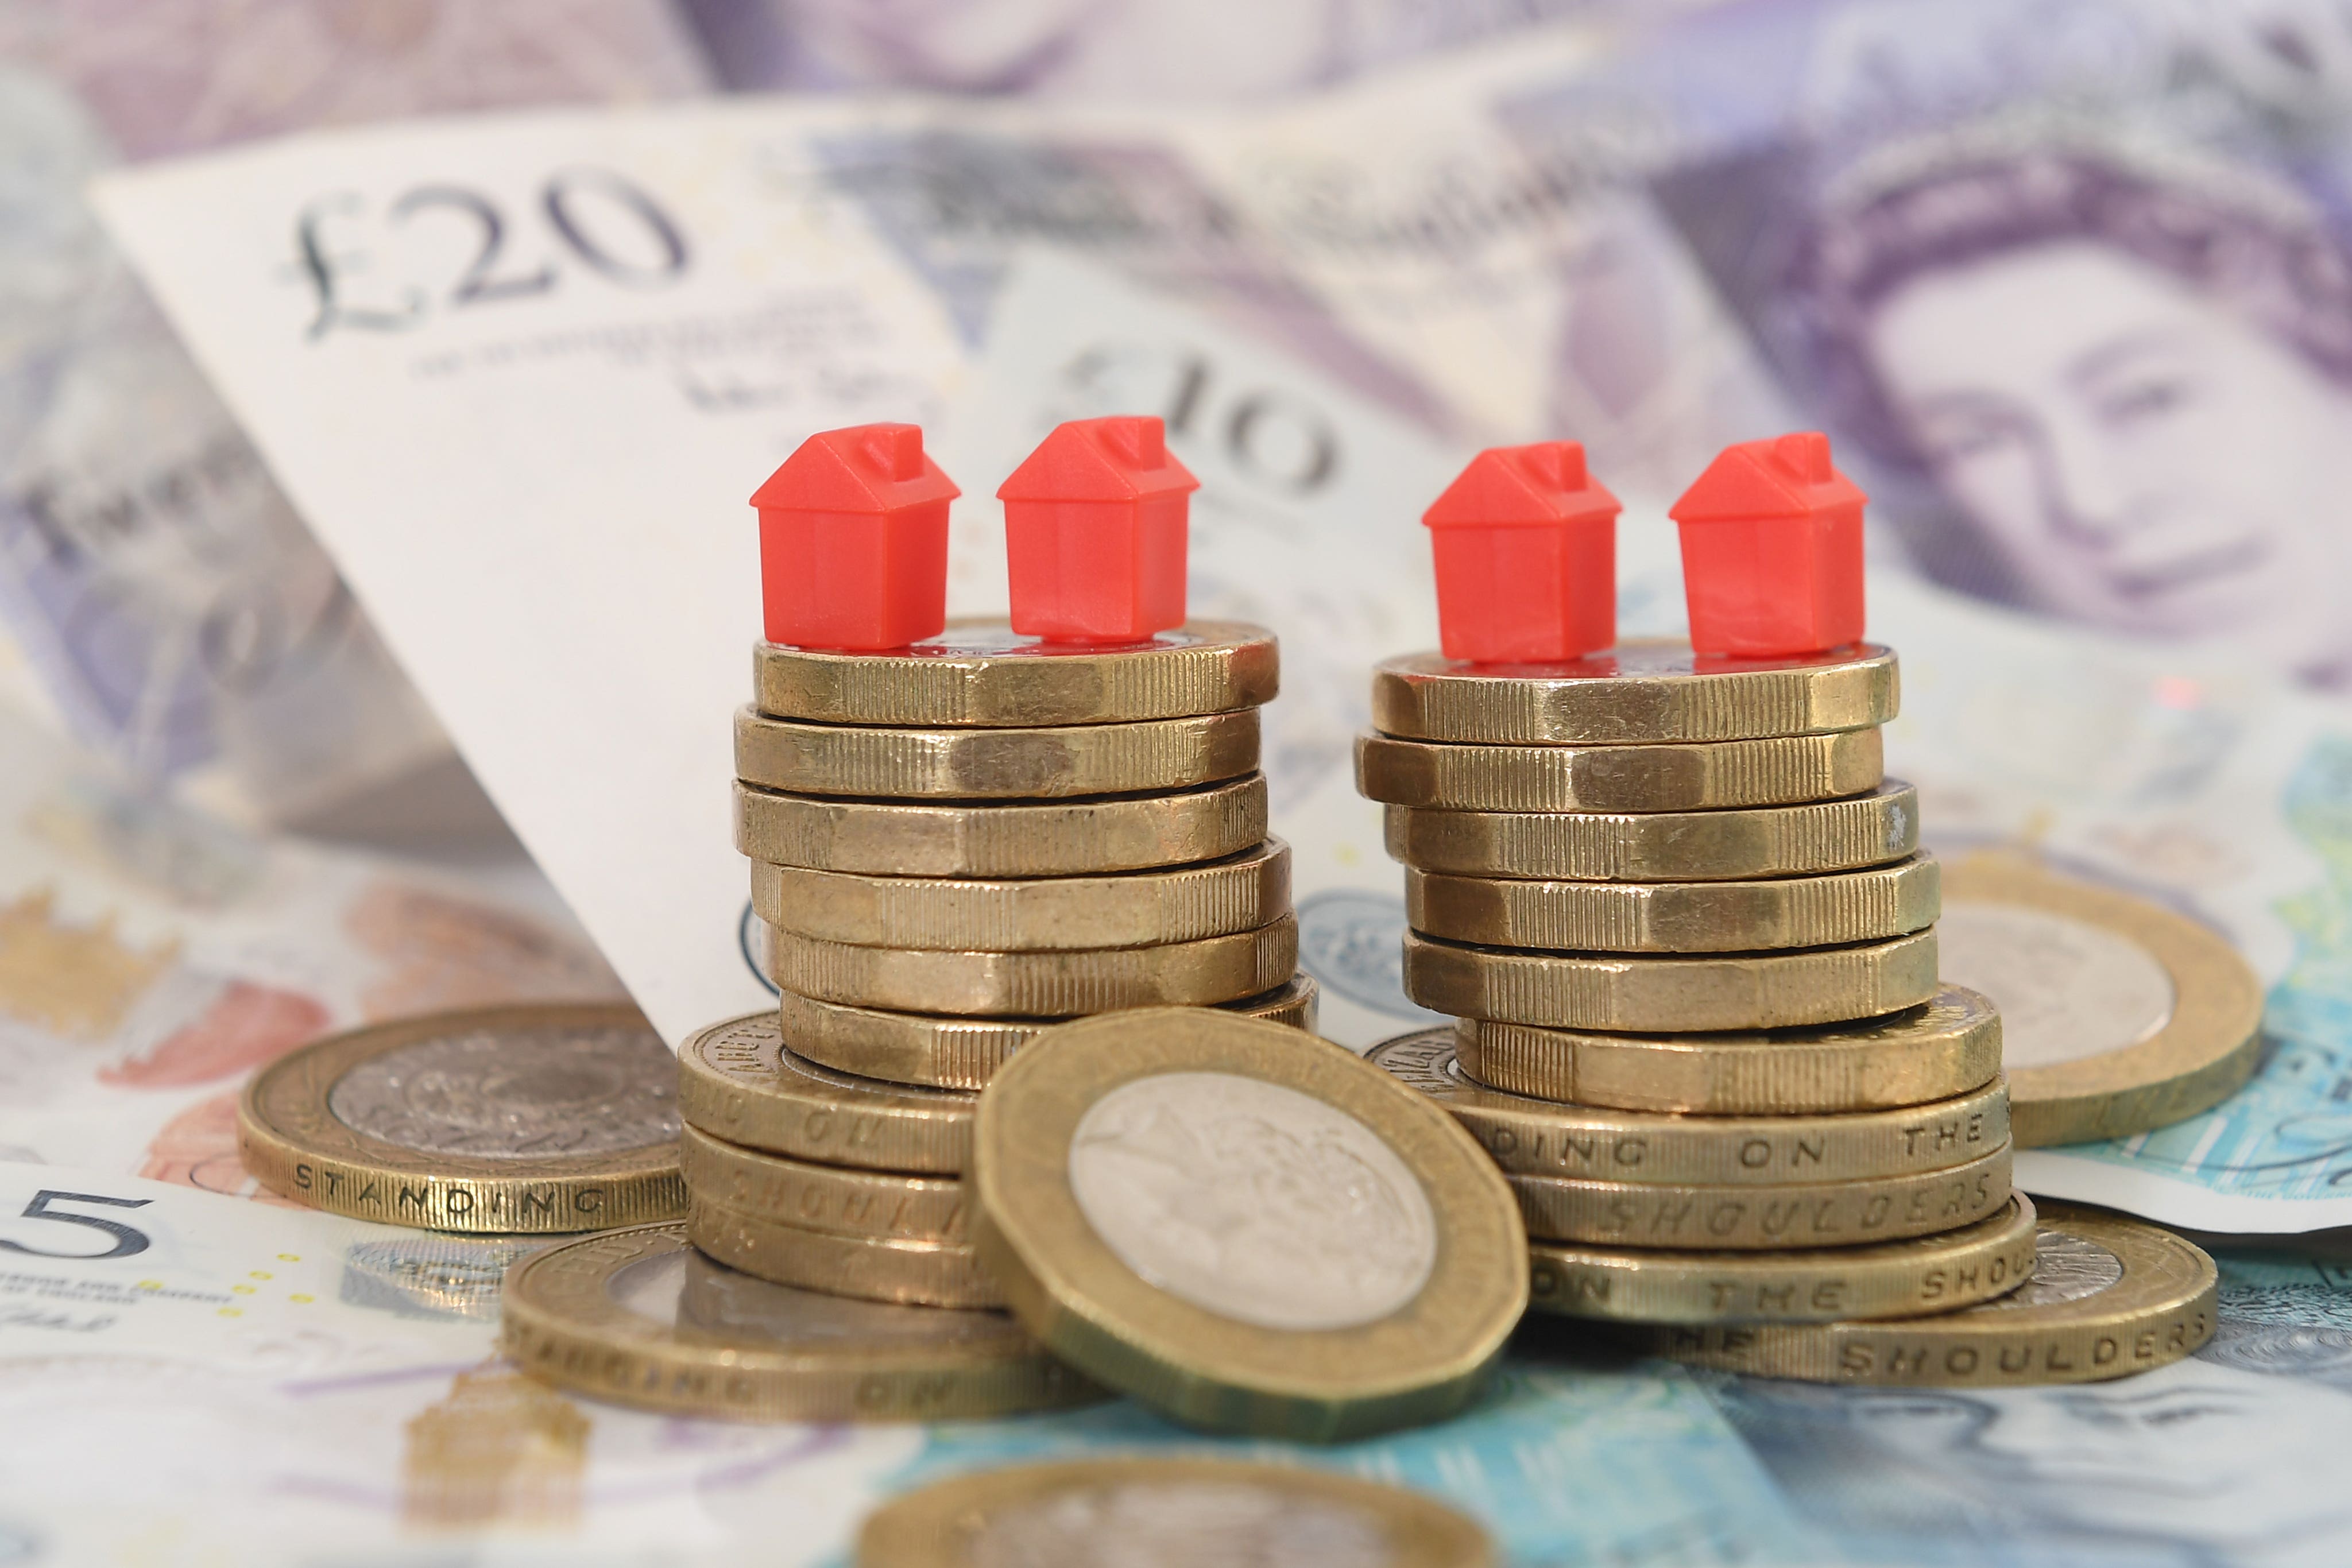 Lenders have said they stand ready to help anyone struggling with their mortgage payments